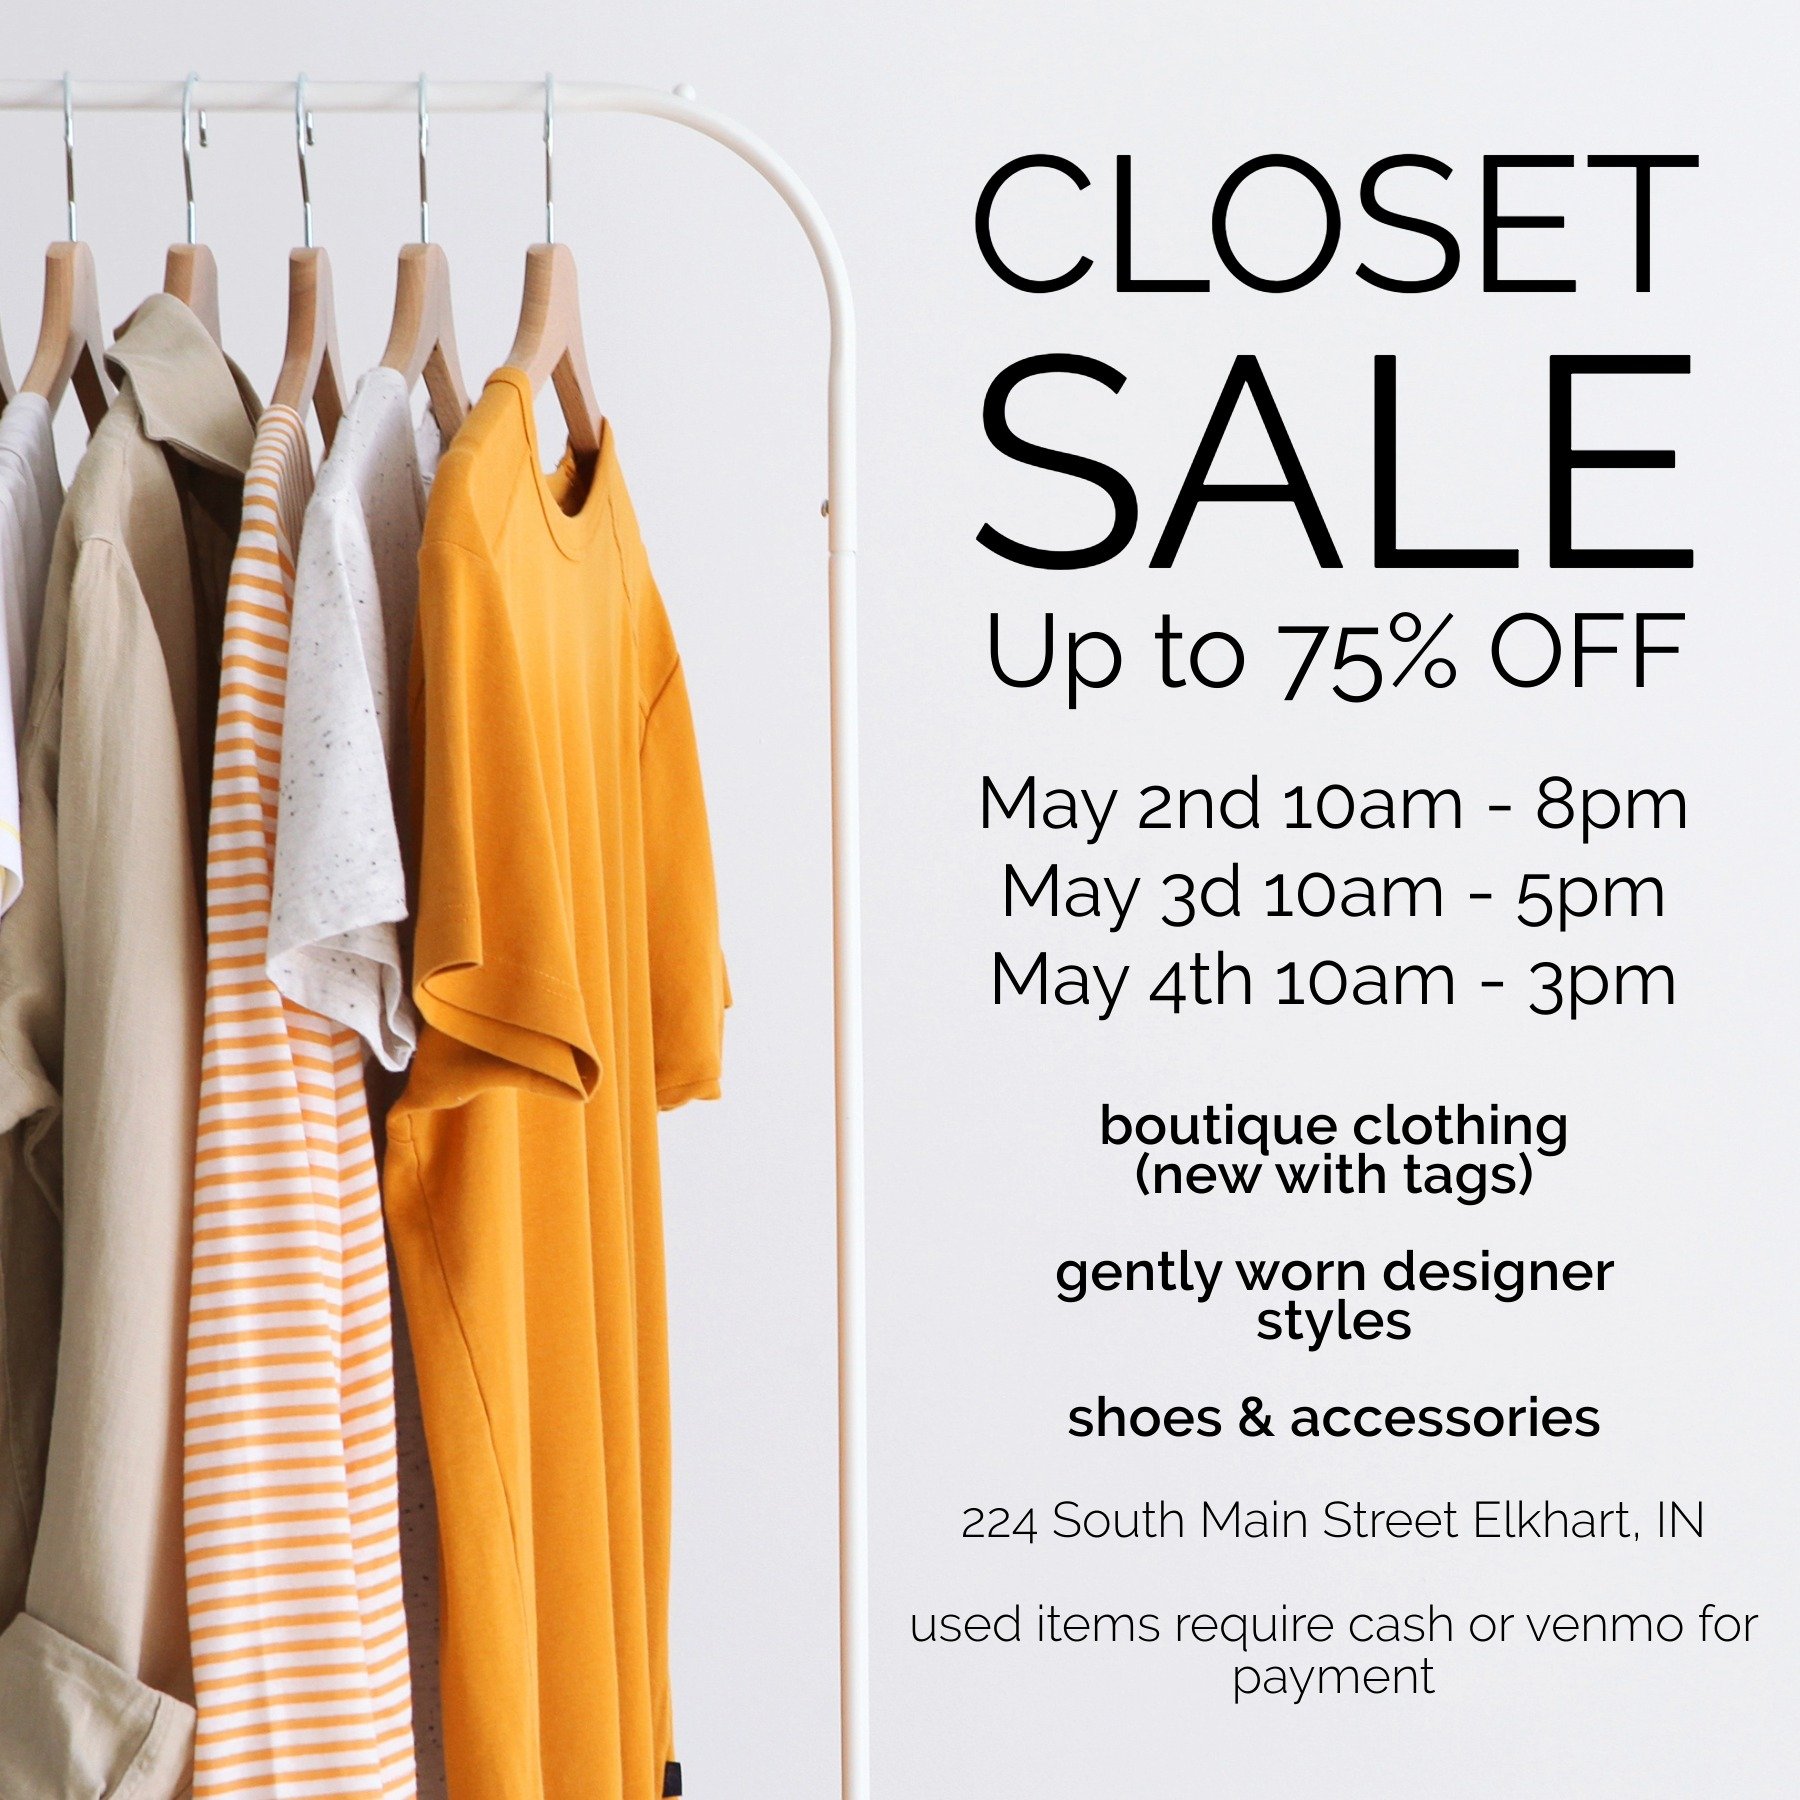 We're doing some spring cleaning and purging our closets! Visit our closet sale to shop off-season boutique clothing (new with tags) as well as gently used designer styles, shoes and accessories for up to 75% off from @corazonsterling, @grazebyerica 